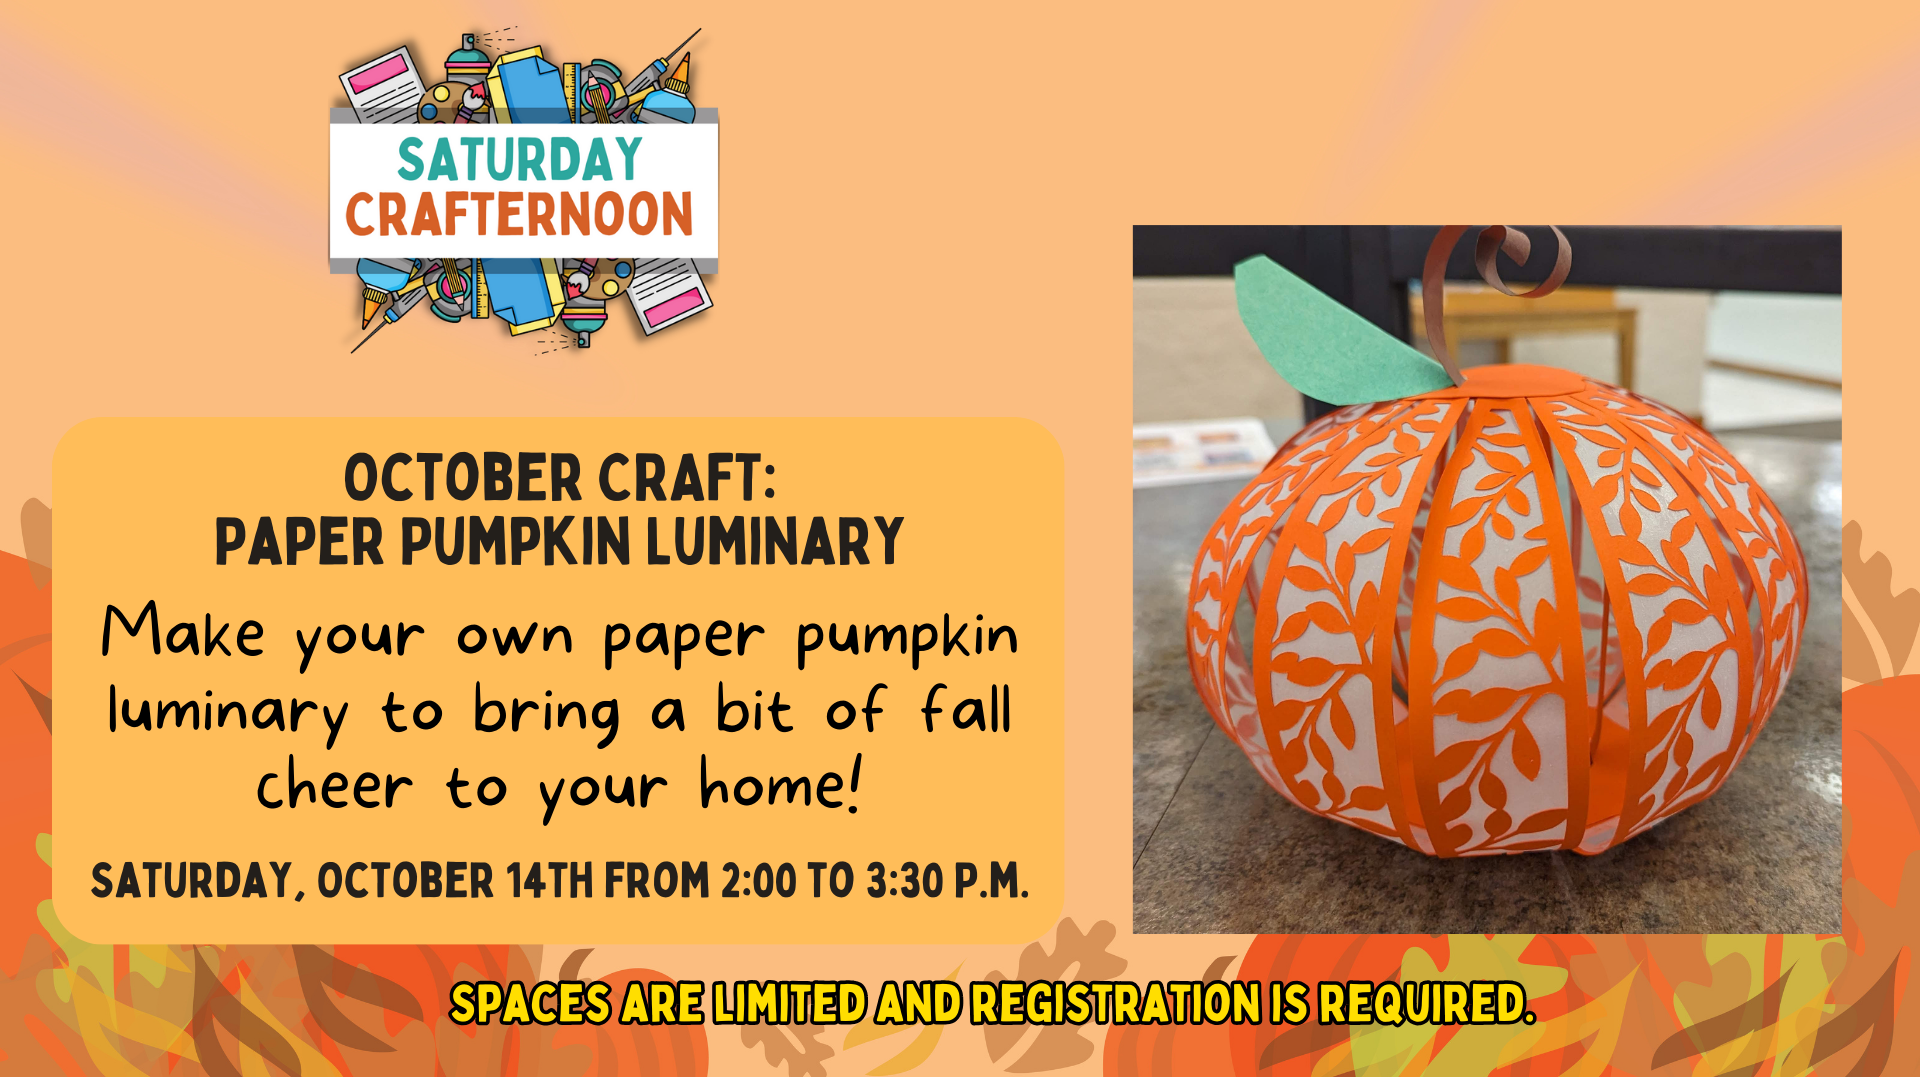 Promotional image for Paper Pumpkin Luminaries craft program to be held on Saturday, October 14th from 2:00 to 3:30 p.m.  